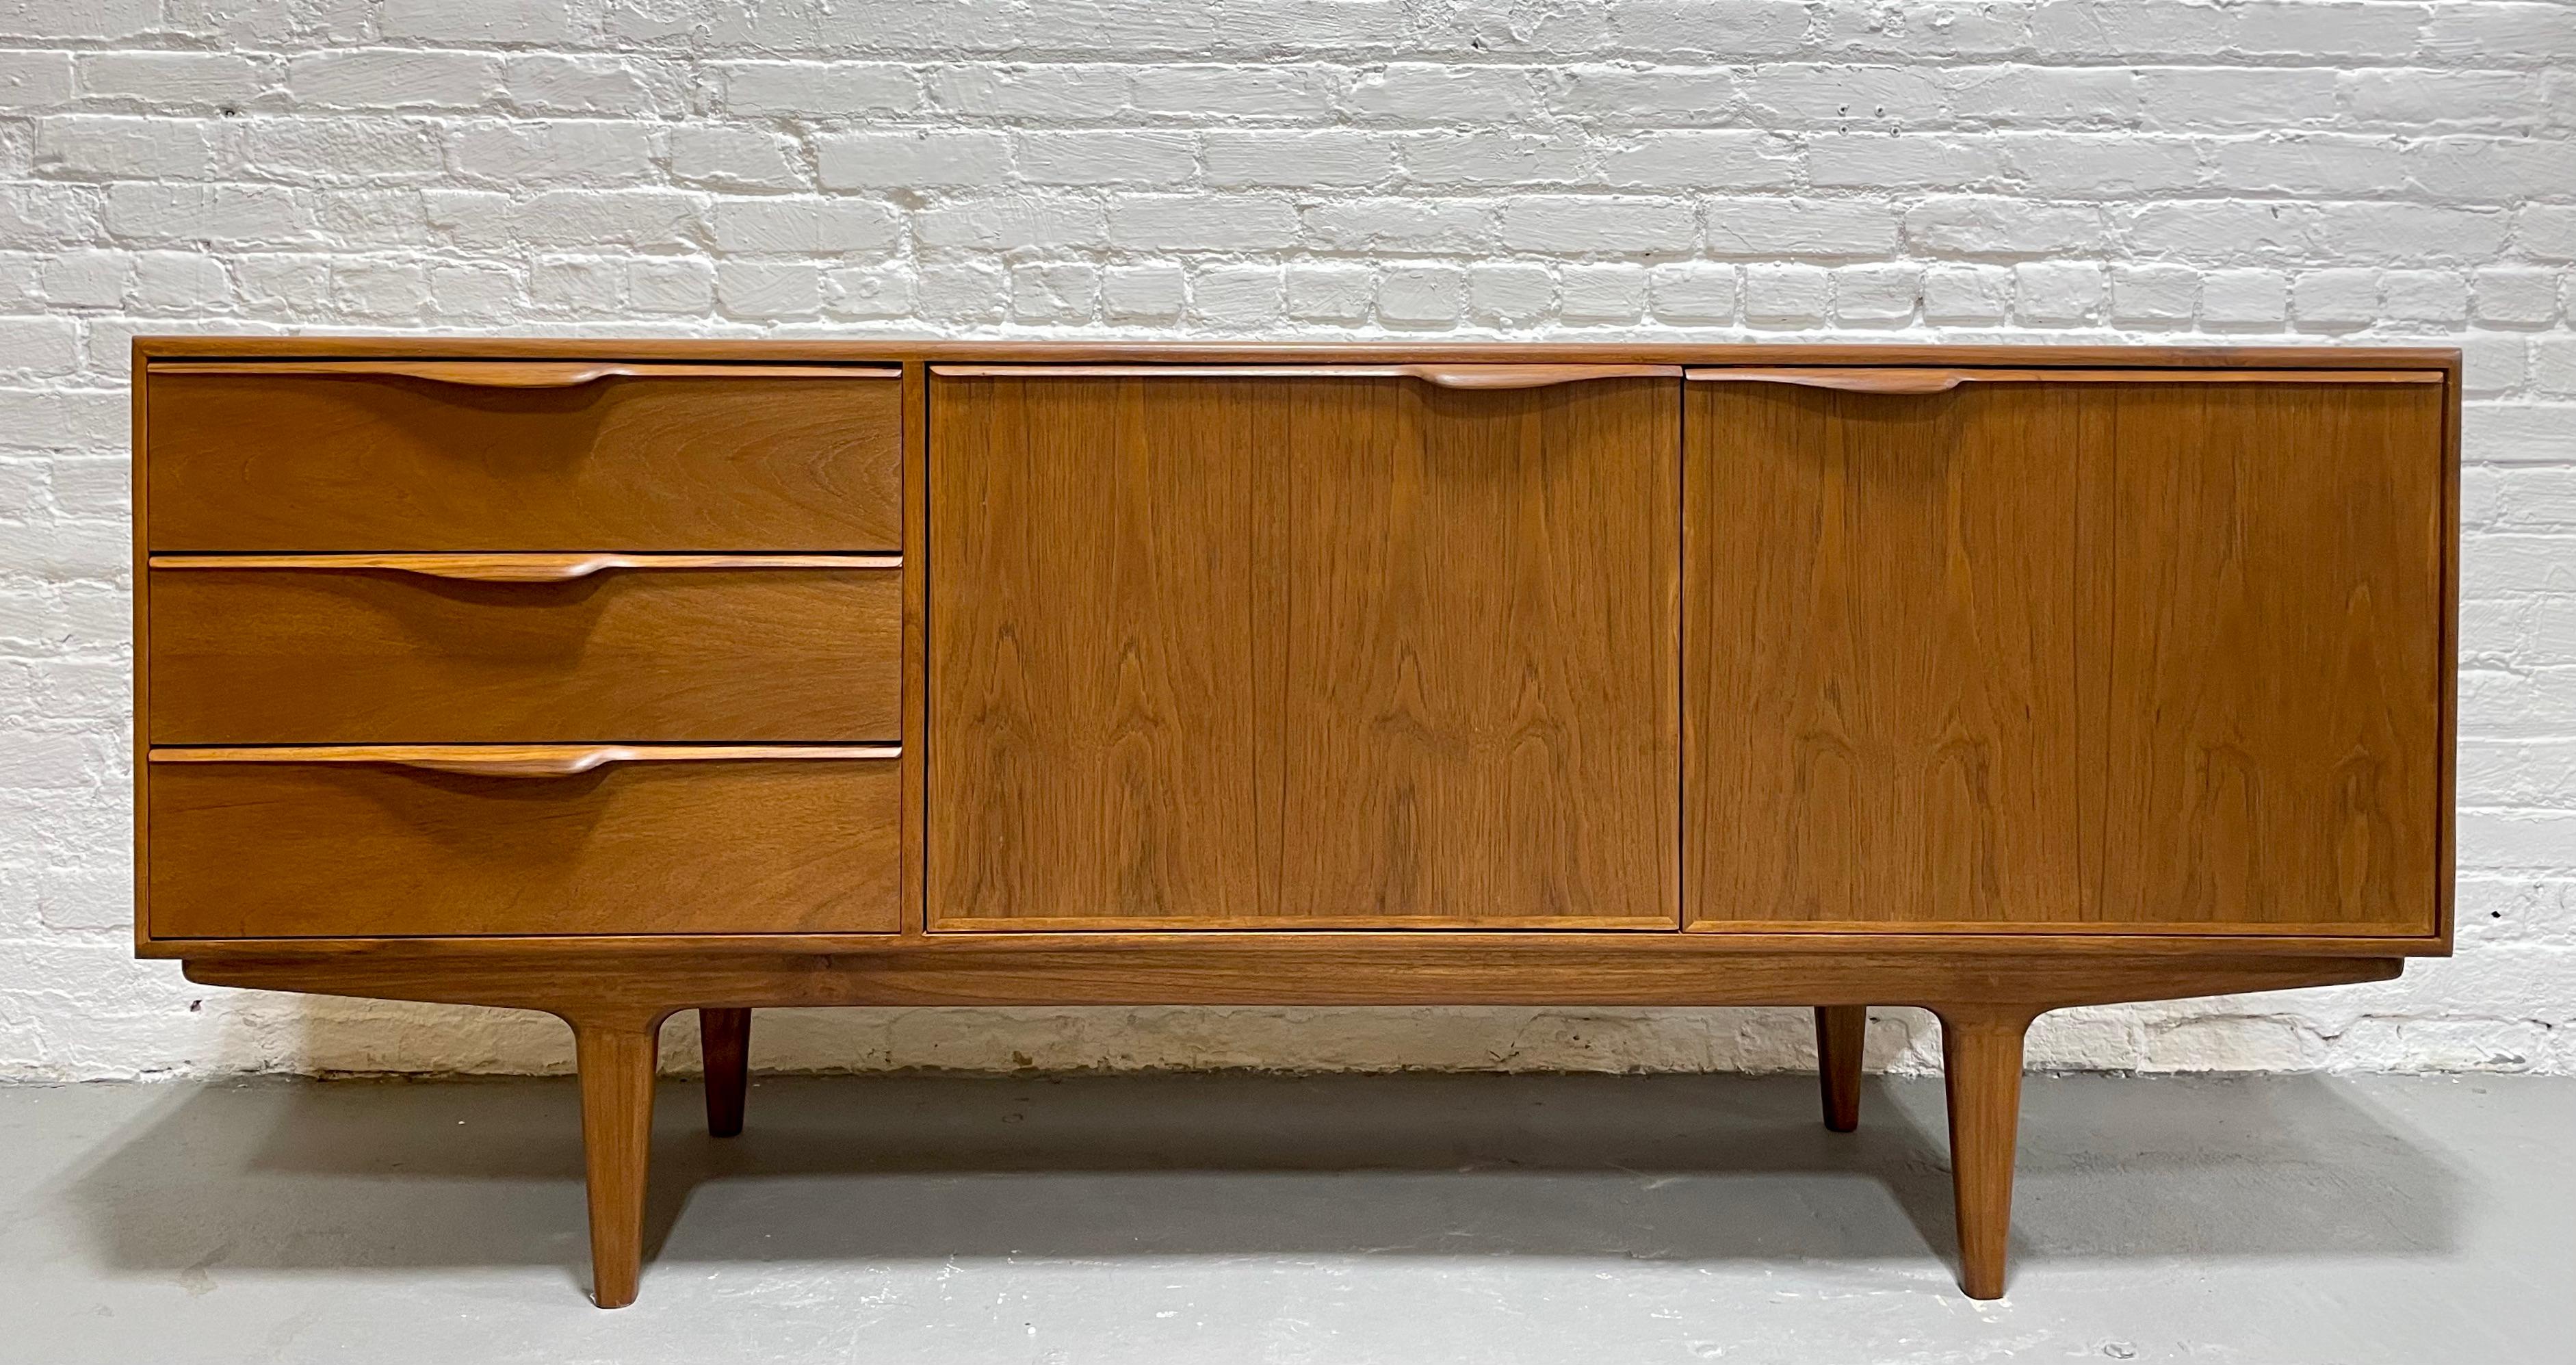 Sculptural + Funky Mid Century Modern styled Credenza / Media Stand with loads of storage space in the three deep + spacious drawers and two shelving areas, each with an adjustable/removable shelf. The handpulls are set asymmetrically on the drawers